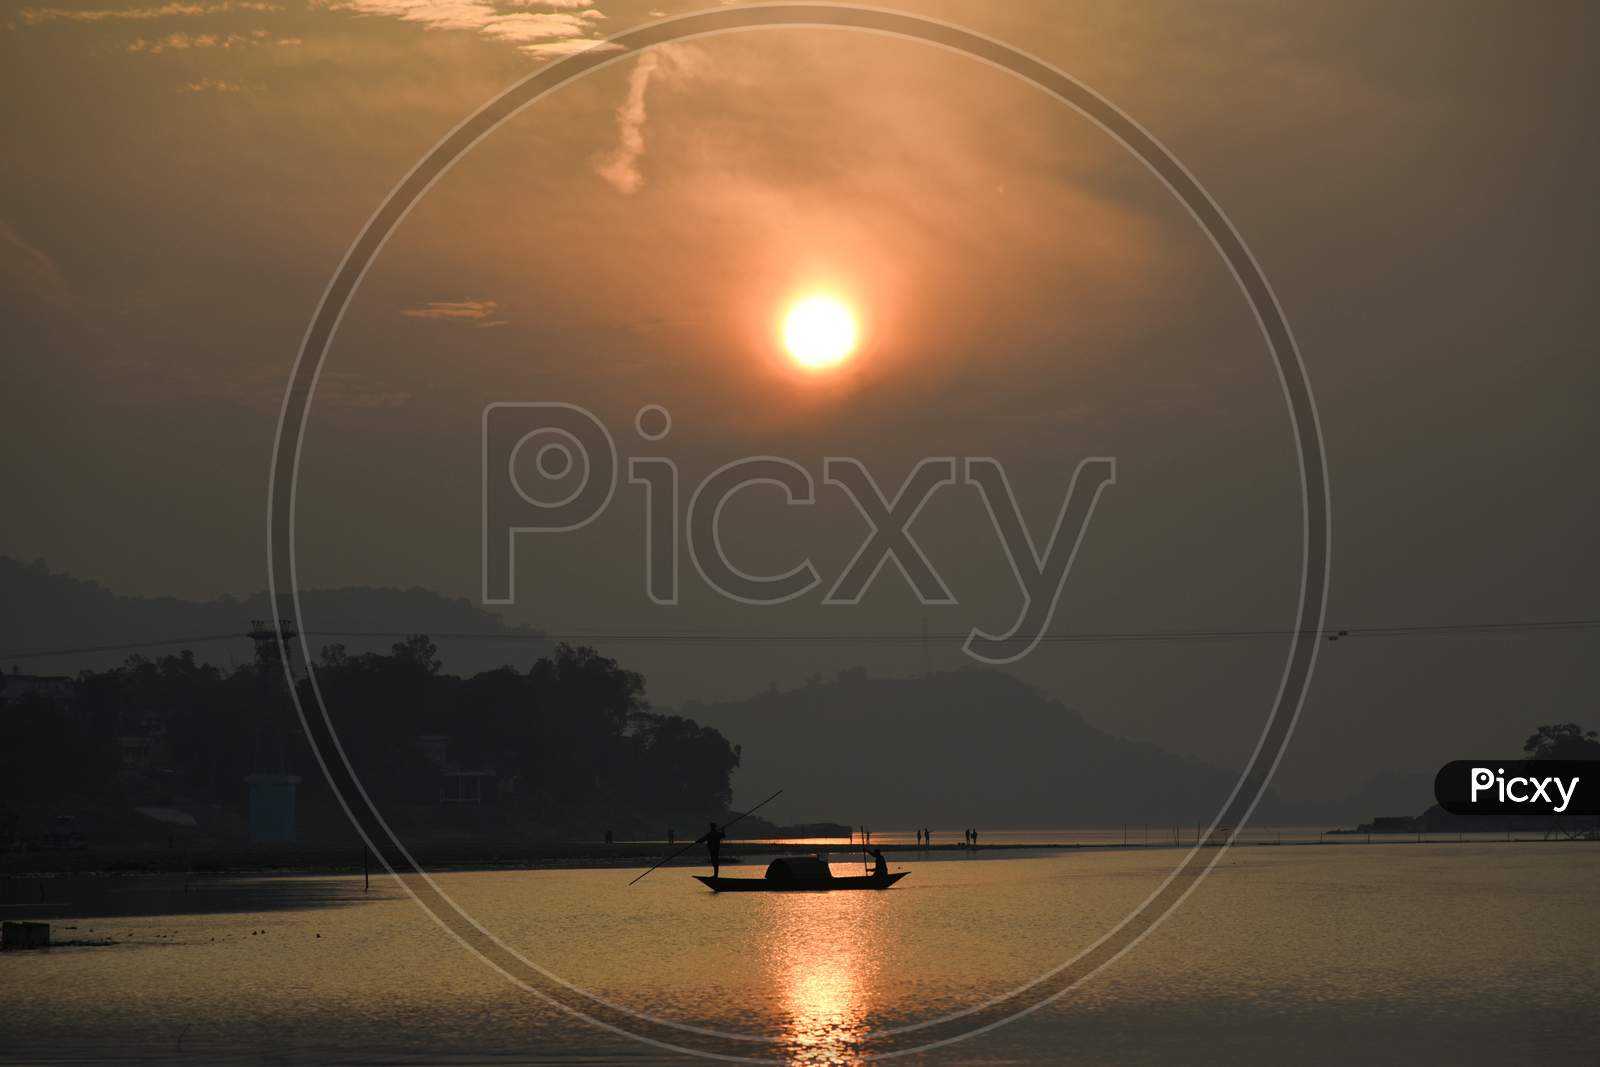 Fisherman Paddle A Boat After Fish In The Brahmaputra River, In Guwahati